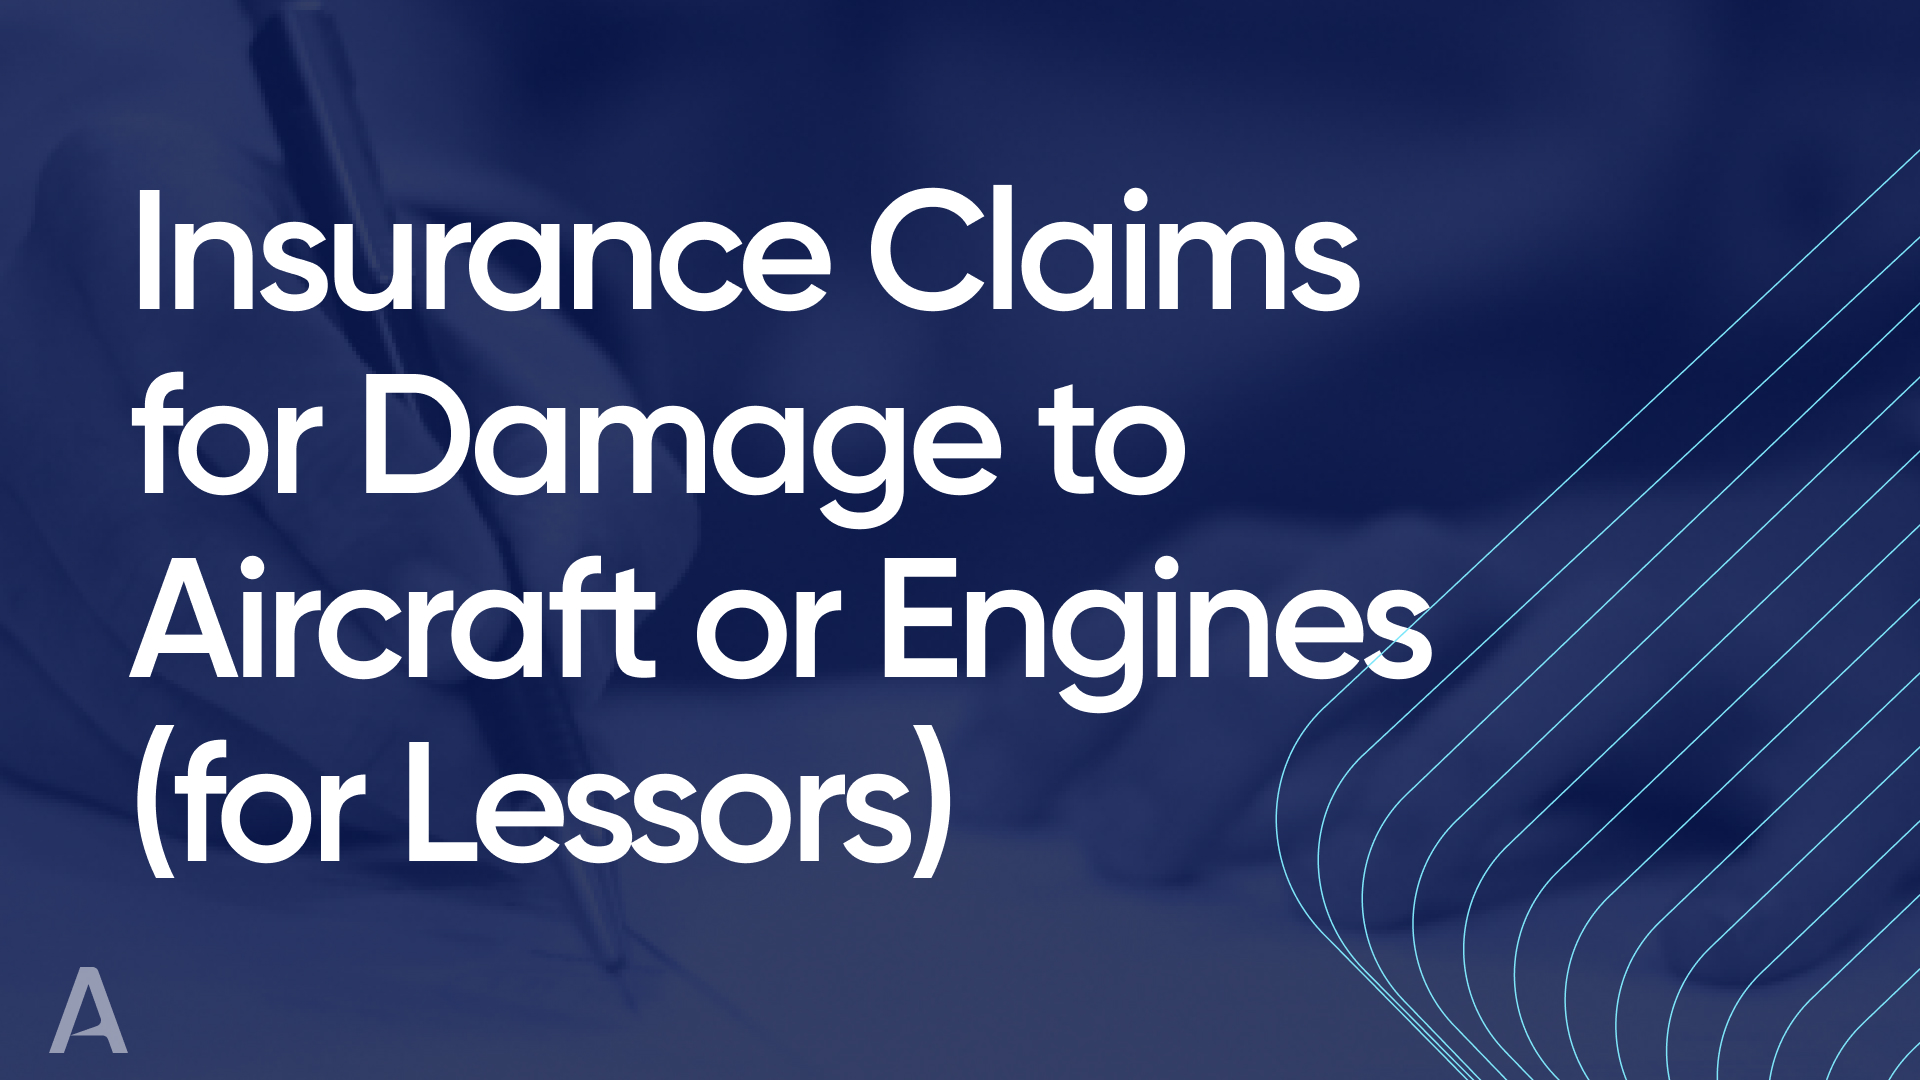 Insurance Claims for Damage to Aircraft or Engines (for Lessors)